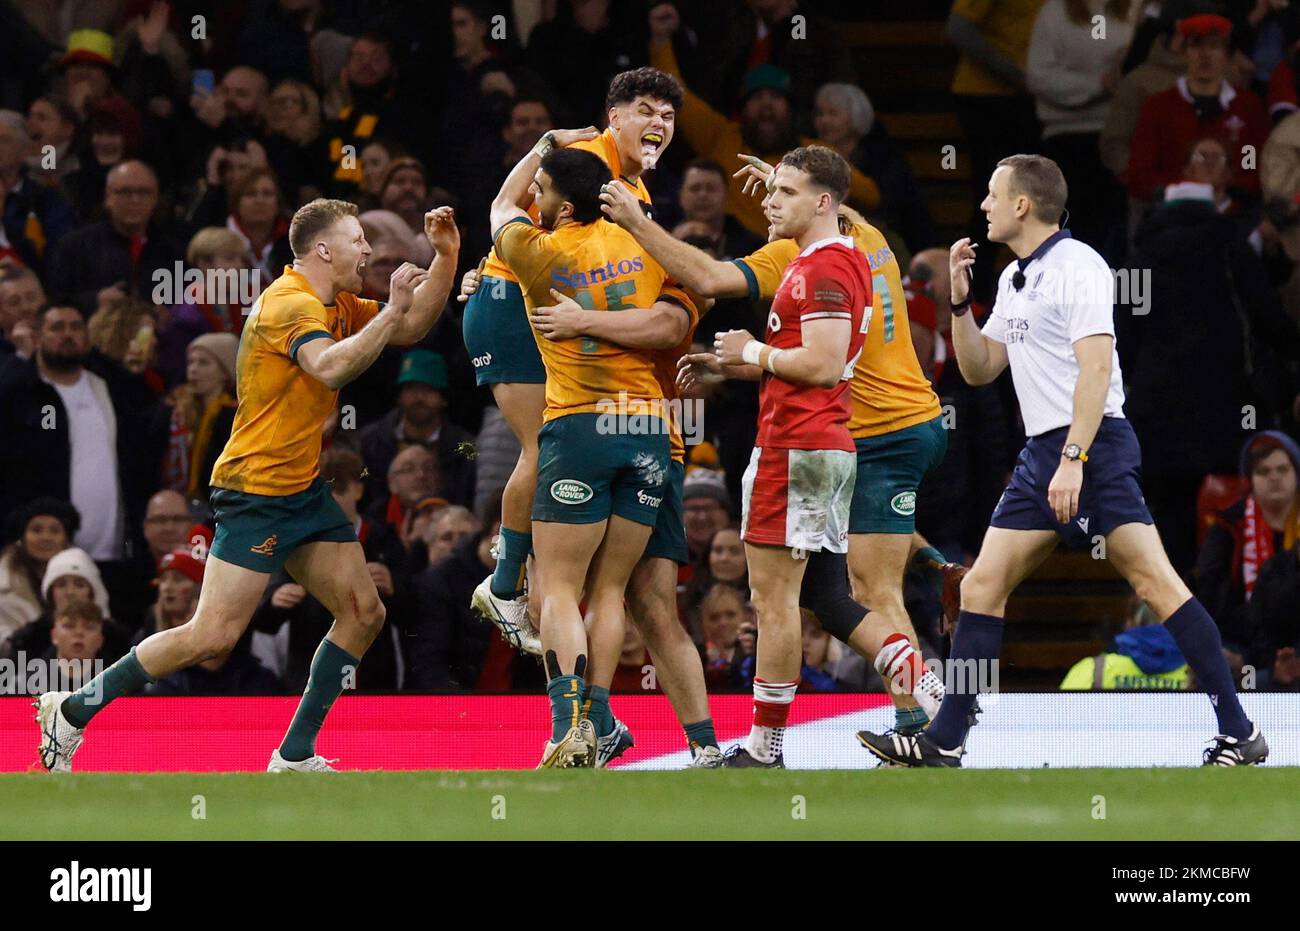 Rugby Union - International - Wales v Australia - Principality Stadium, Cardiff, Wales, Britain - November 26, 2022 Australia players celebrate after the match Action Images via Reuters/Andrew Couldridge Stock Photo